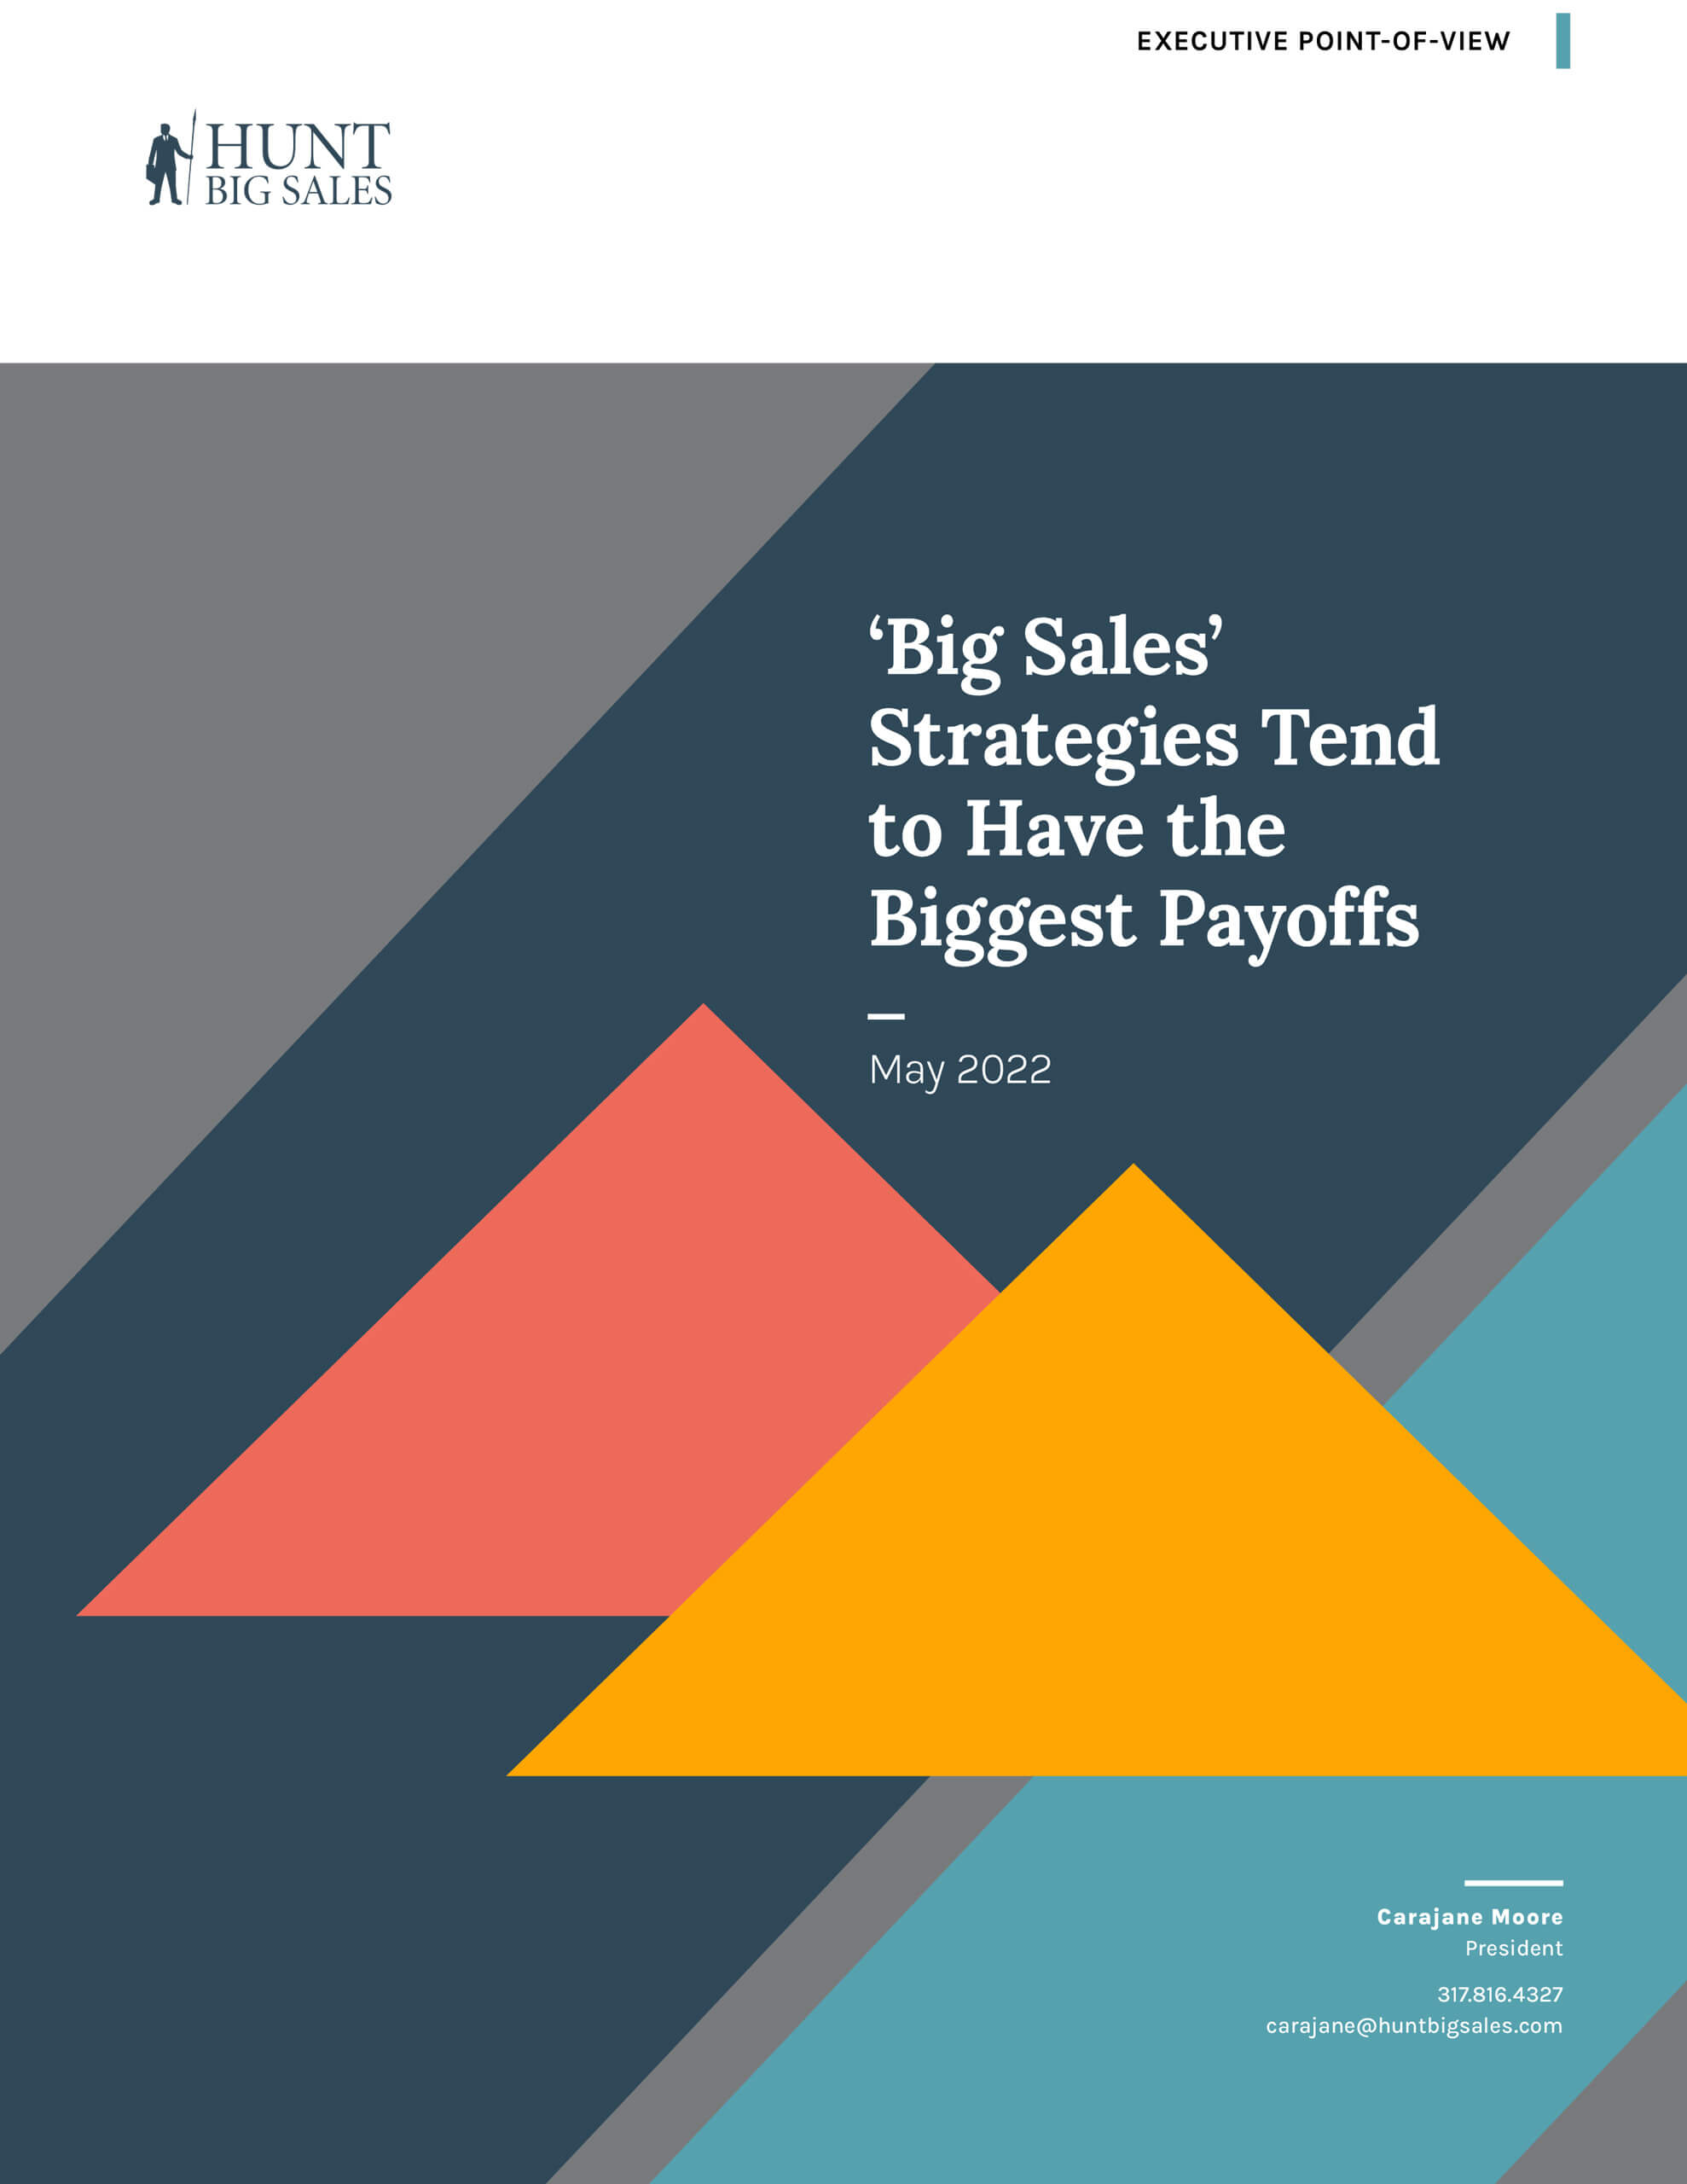 Big Sales Strategies Tend to Have The Biggest Payoffs cover page